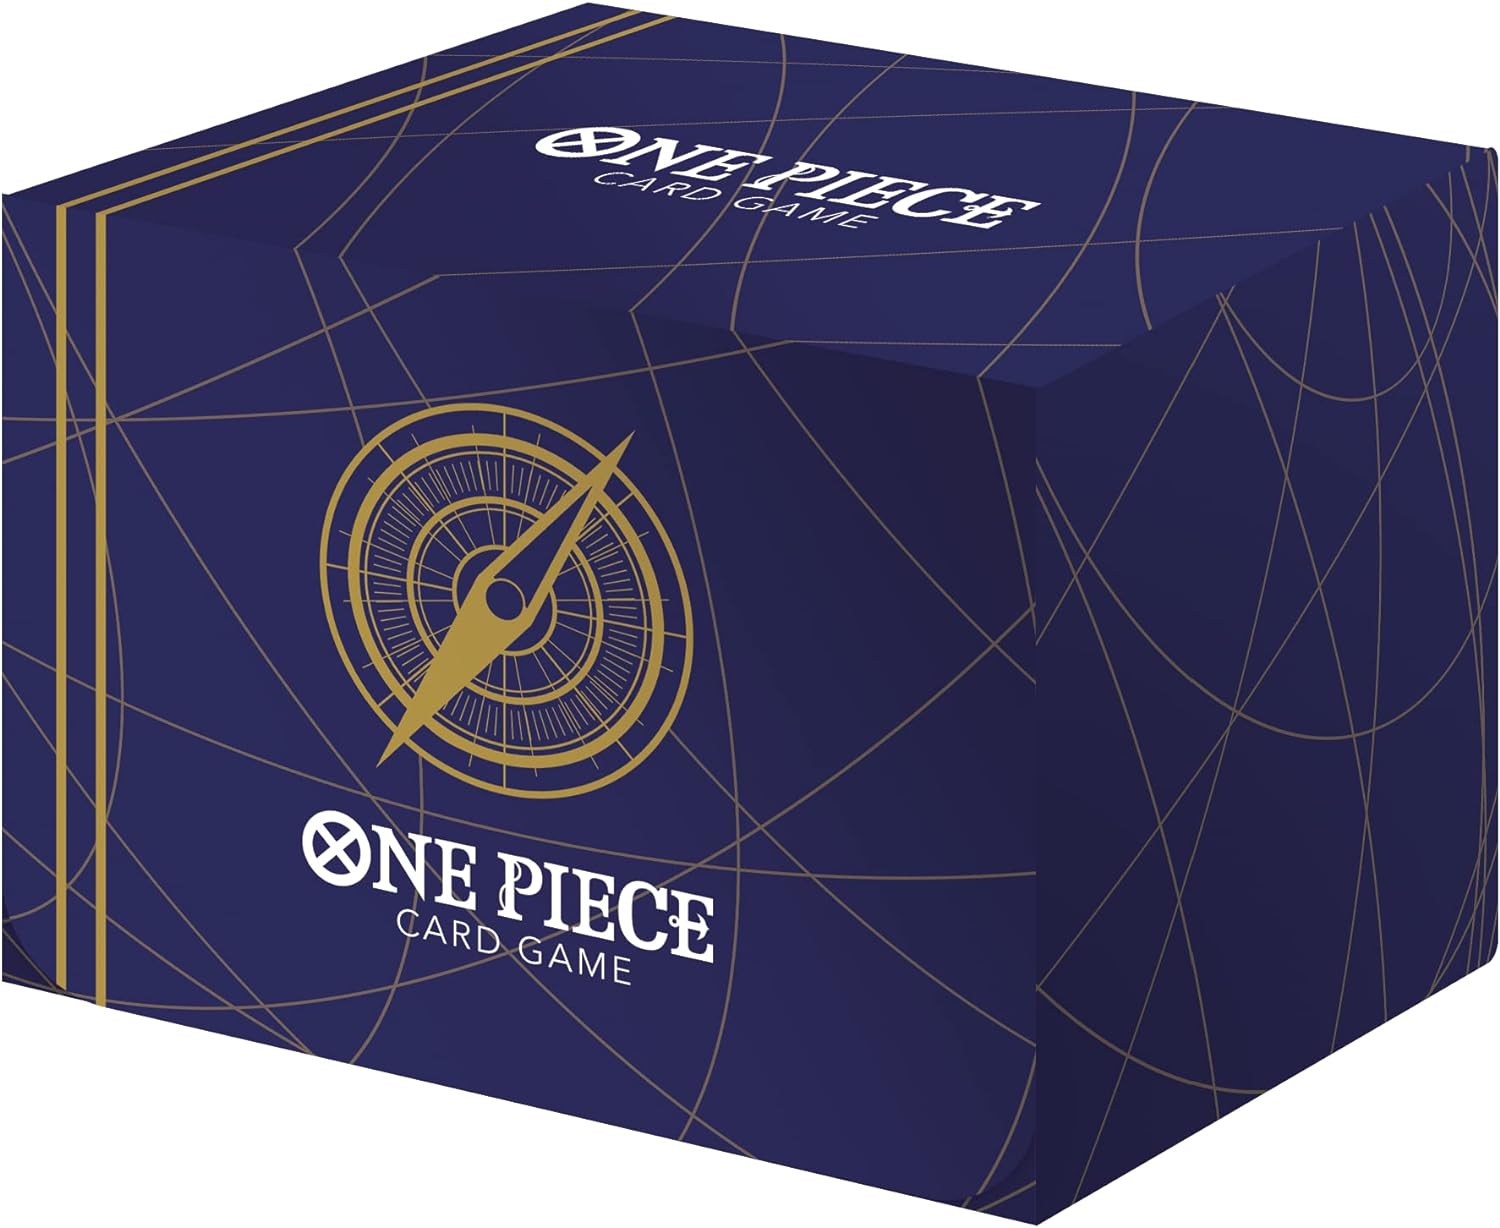 Front Cover of One Piece Card Game Official Card Case: Standard Blue. Image Source: Bandai Namco